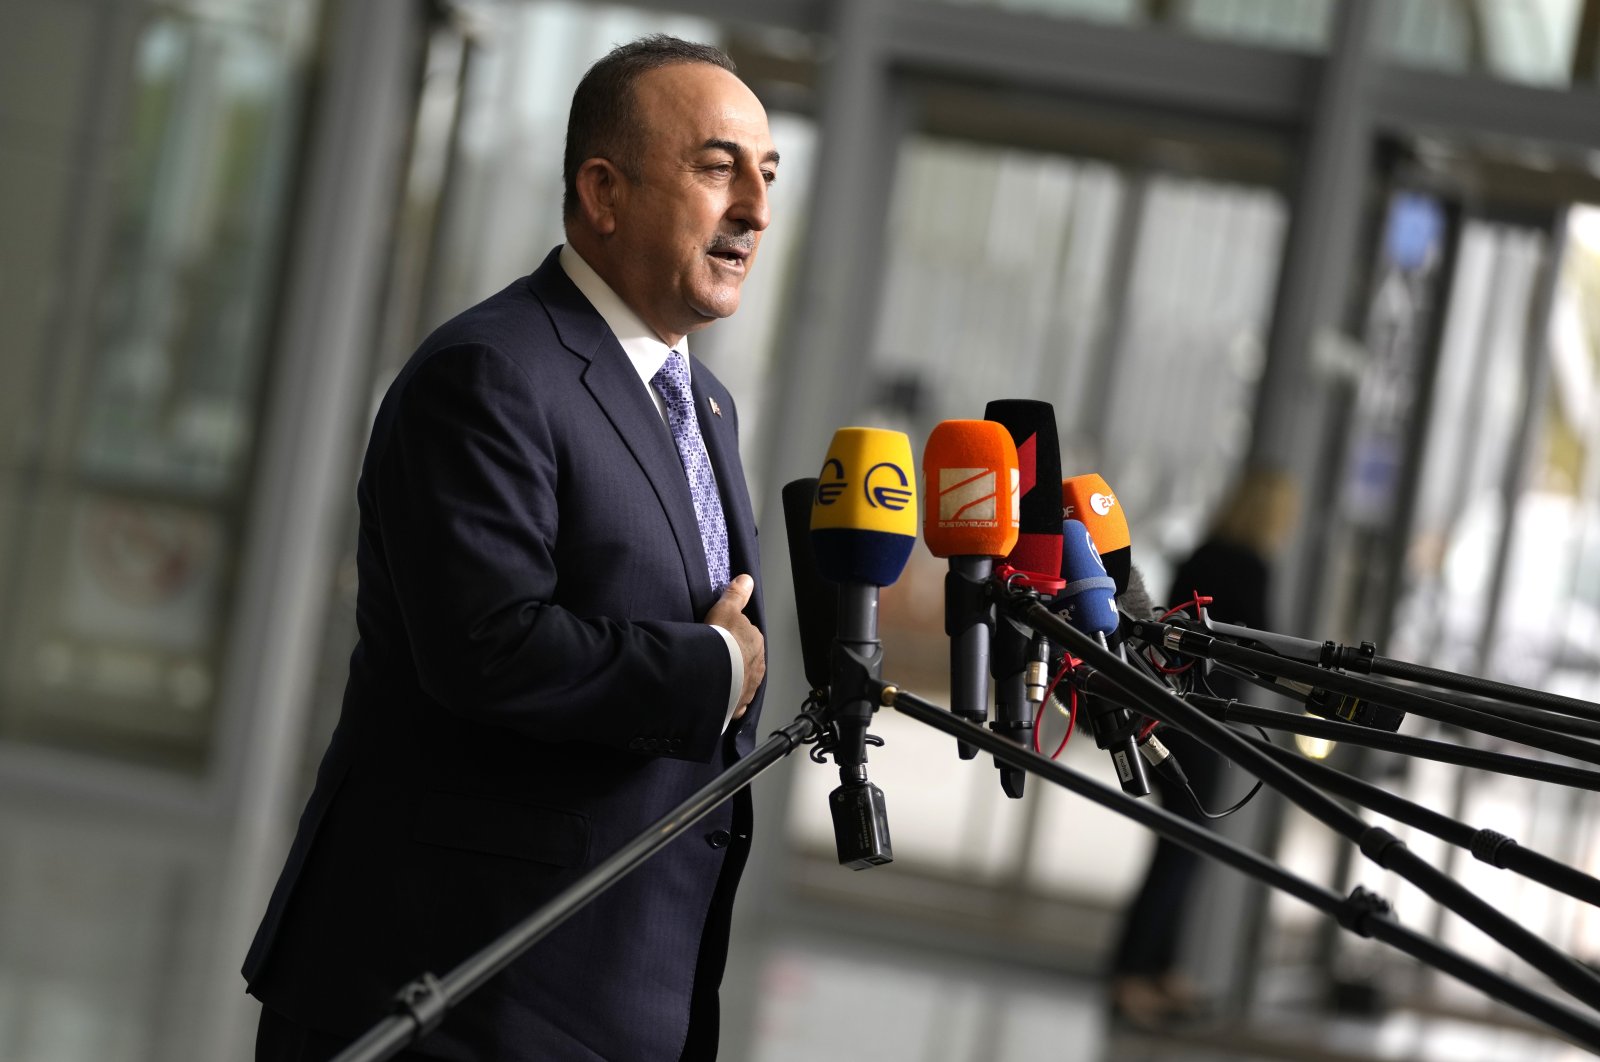 Foreign Minister Mevlüt Çavuşoğlu speaks with the media as he arrives for a meeting of NATO foreign ministers at NATO headquarters in Brussels, April 6, 2022. (AP Photo)